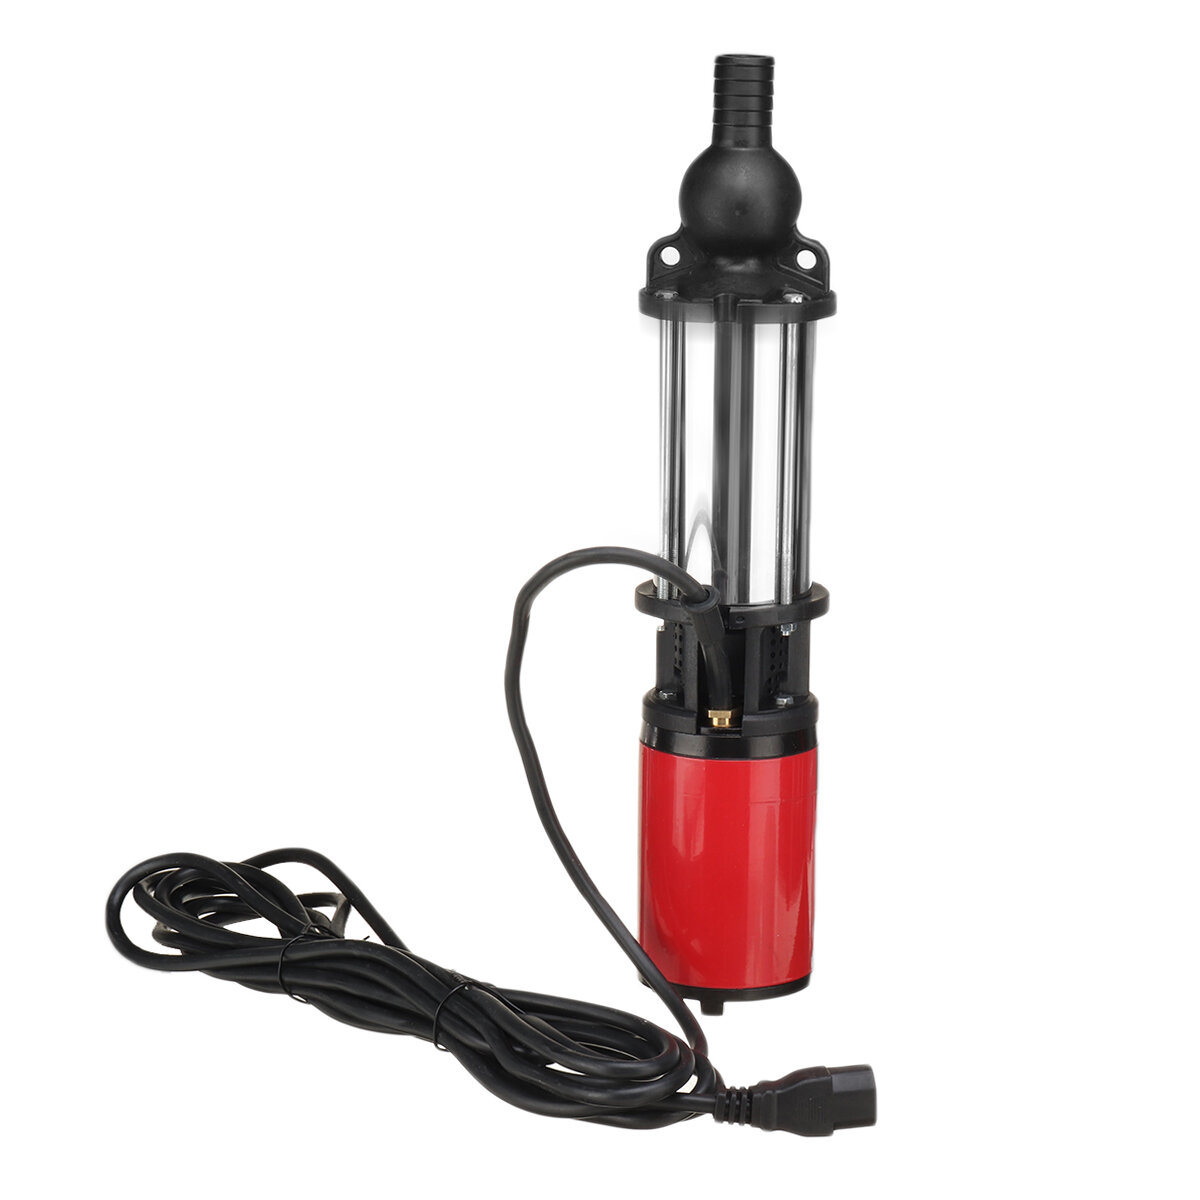 300W Deep Well Submersible Pump 1 Inch 48-60V Water Pumps with 6m Power Cord 15M Lifting